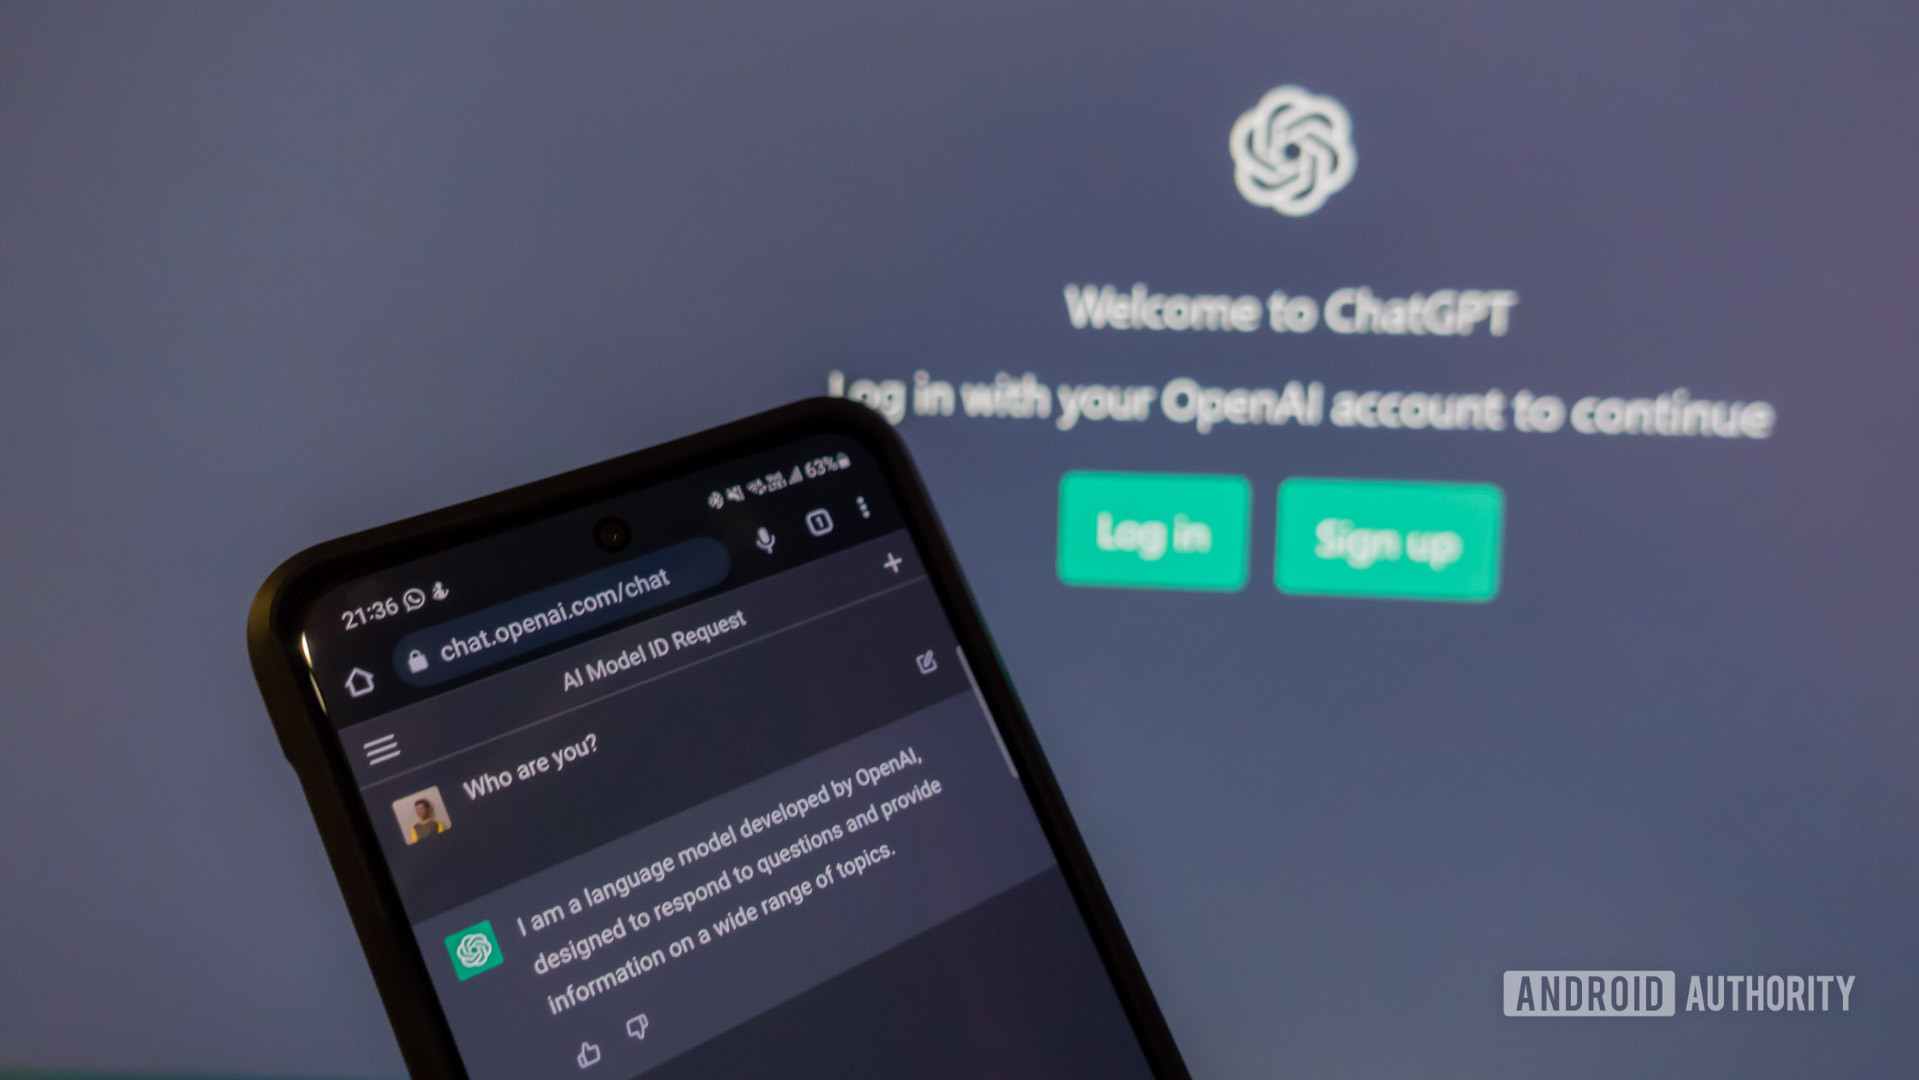 You can now pay for a more powerful version of  OpenAI’s ChatGPT bot